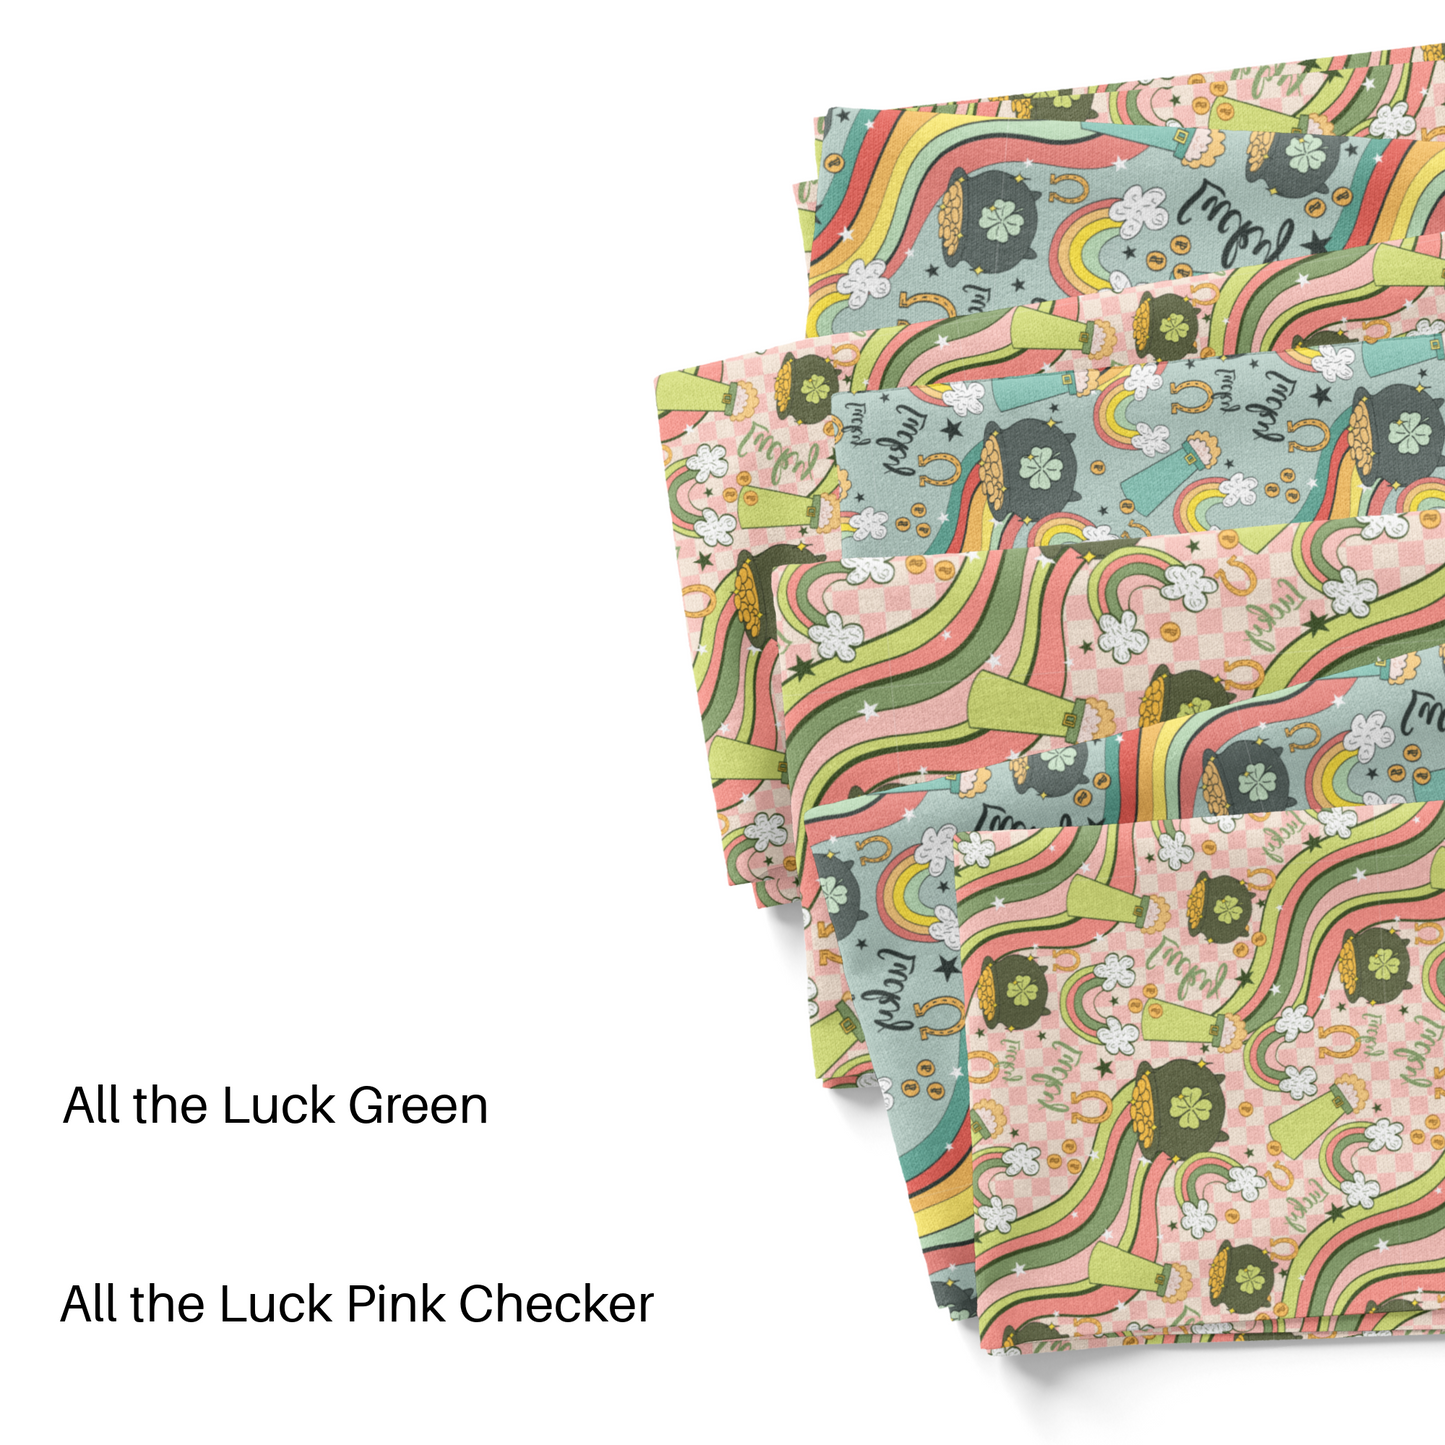 Pink and Blue "All the luck" fabric by the yard swatches.